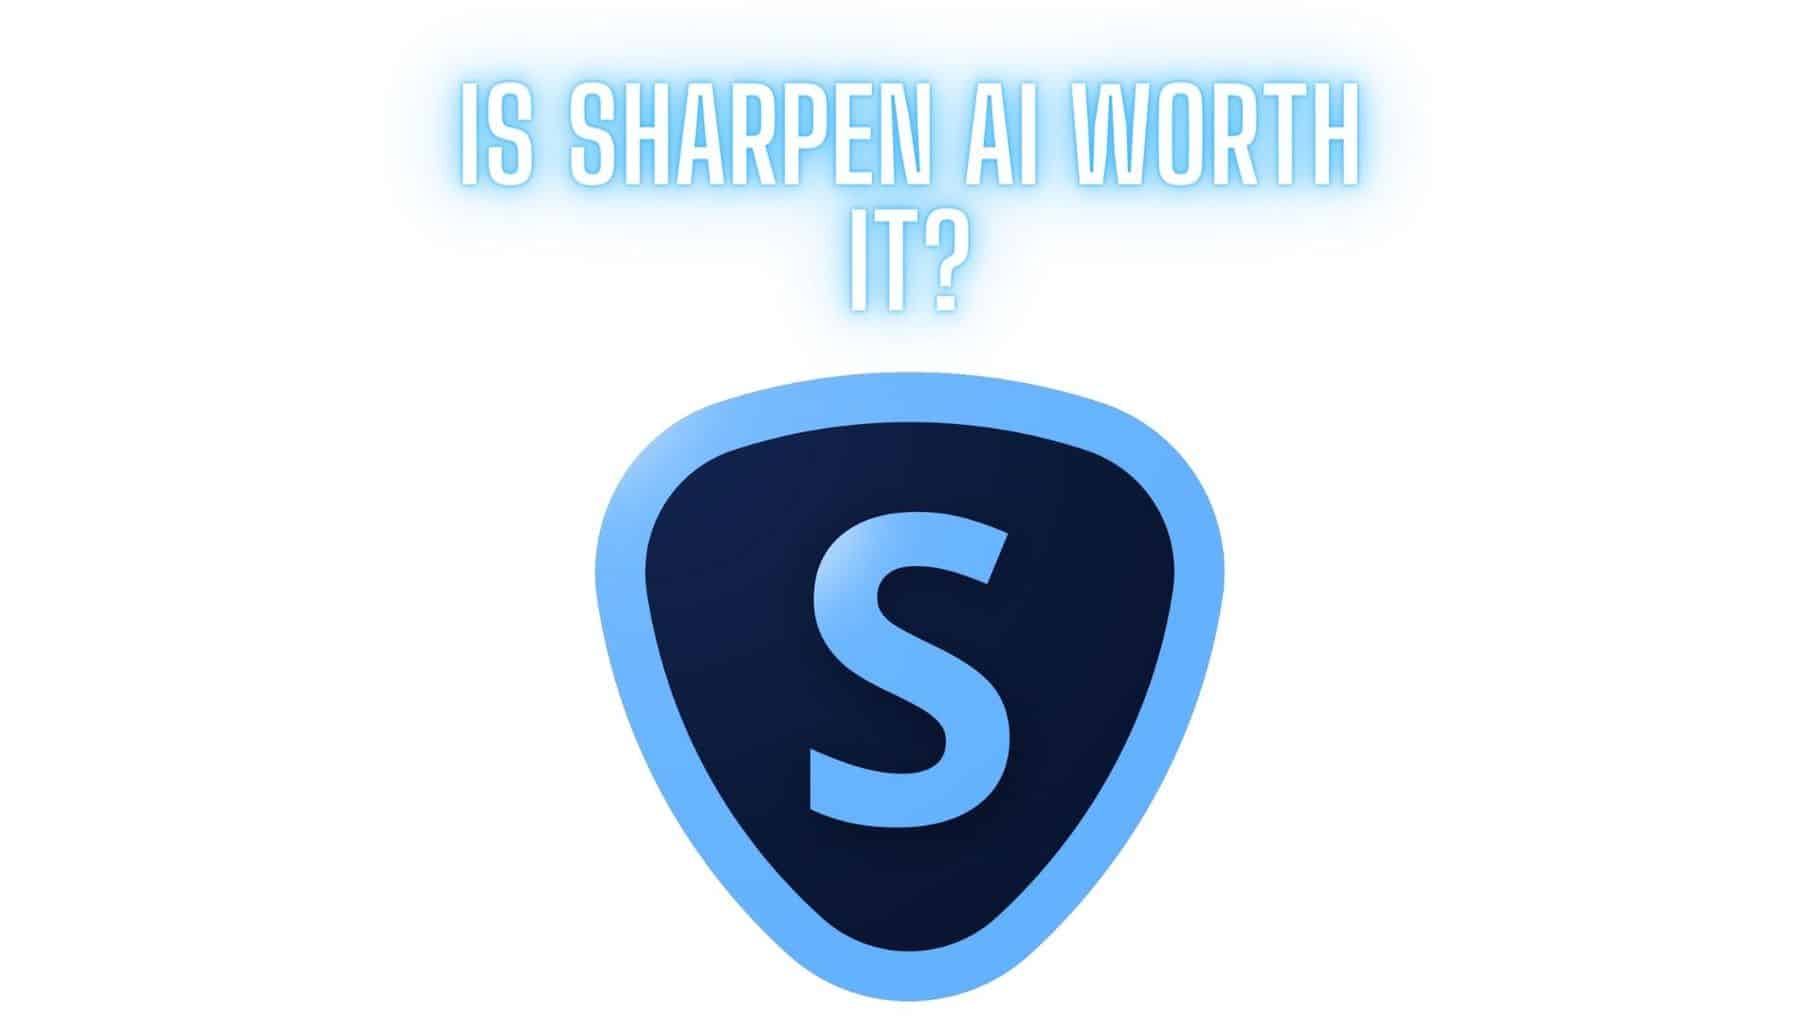 What do you think? Is Sharpen AI worth it?